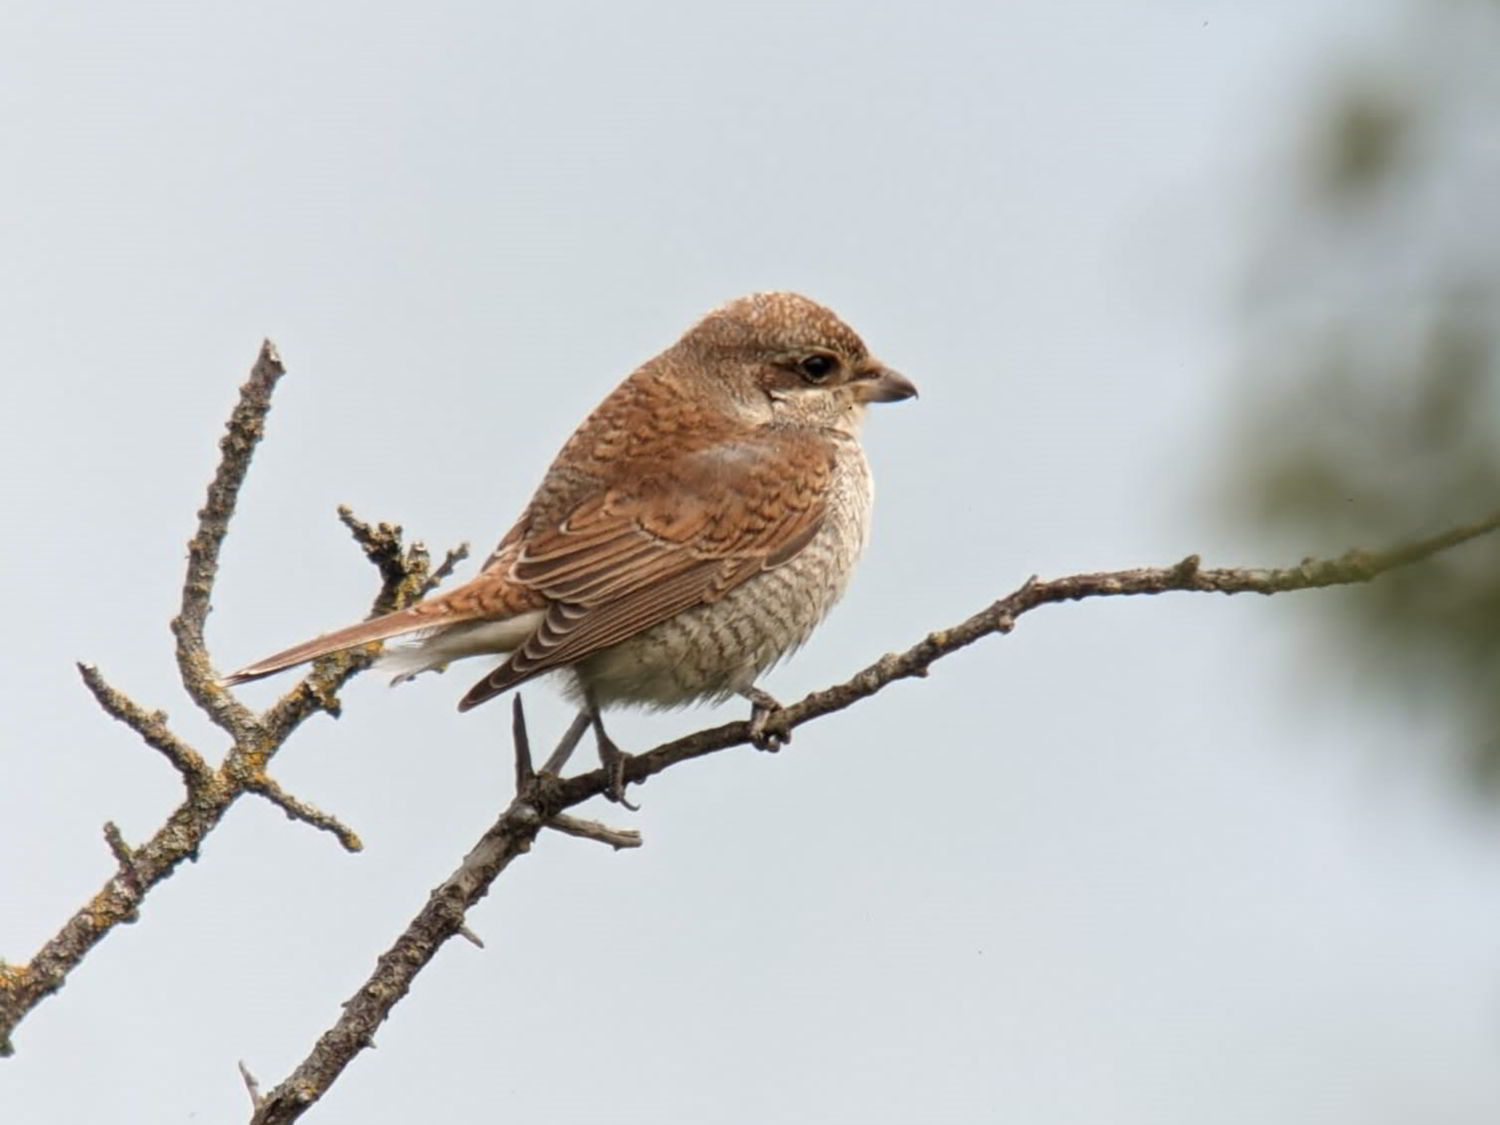 Red-backed Shrike perched on a twig in Dorset